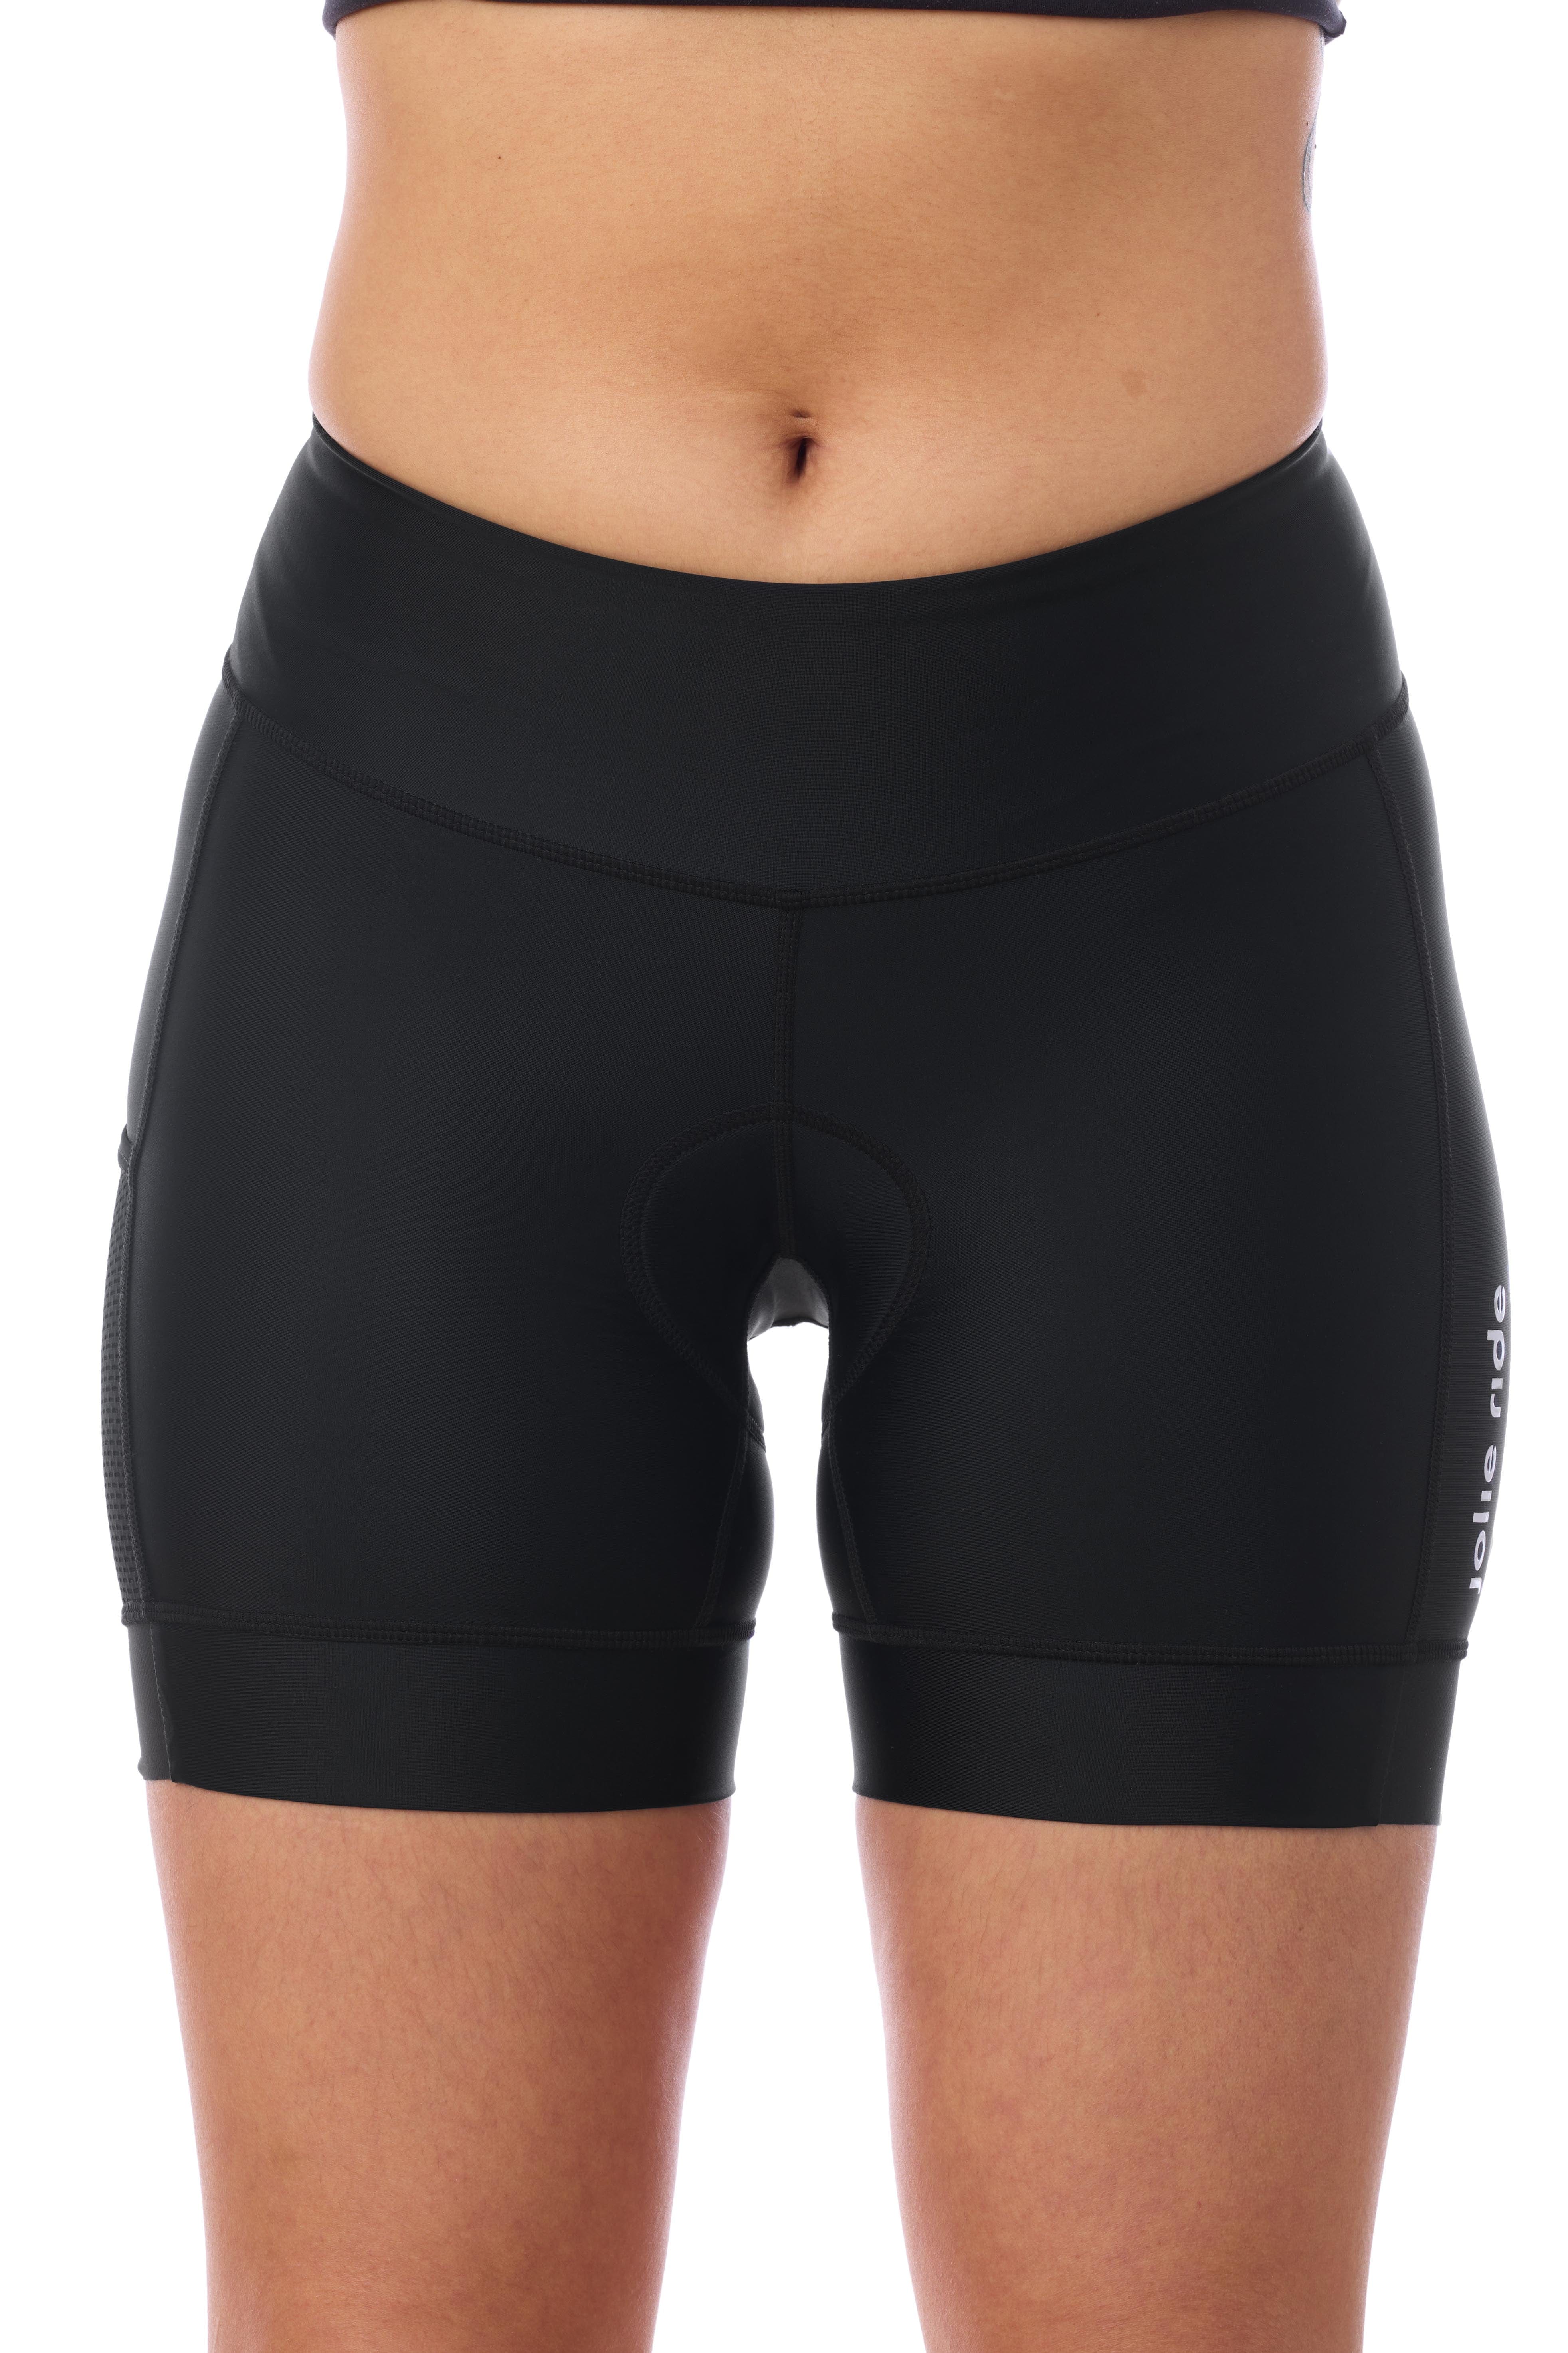 JolieRide Cycling shorts mid-thigh fit cycling shorts with 5 1/2" Inseam and UV protection